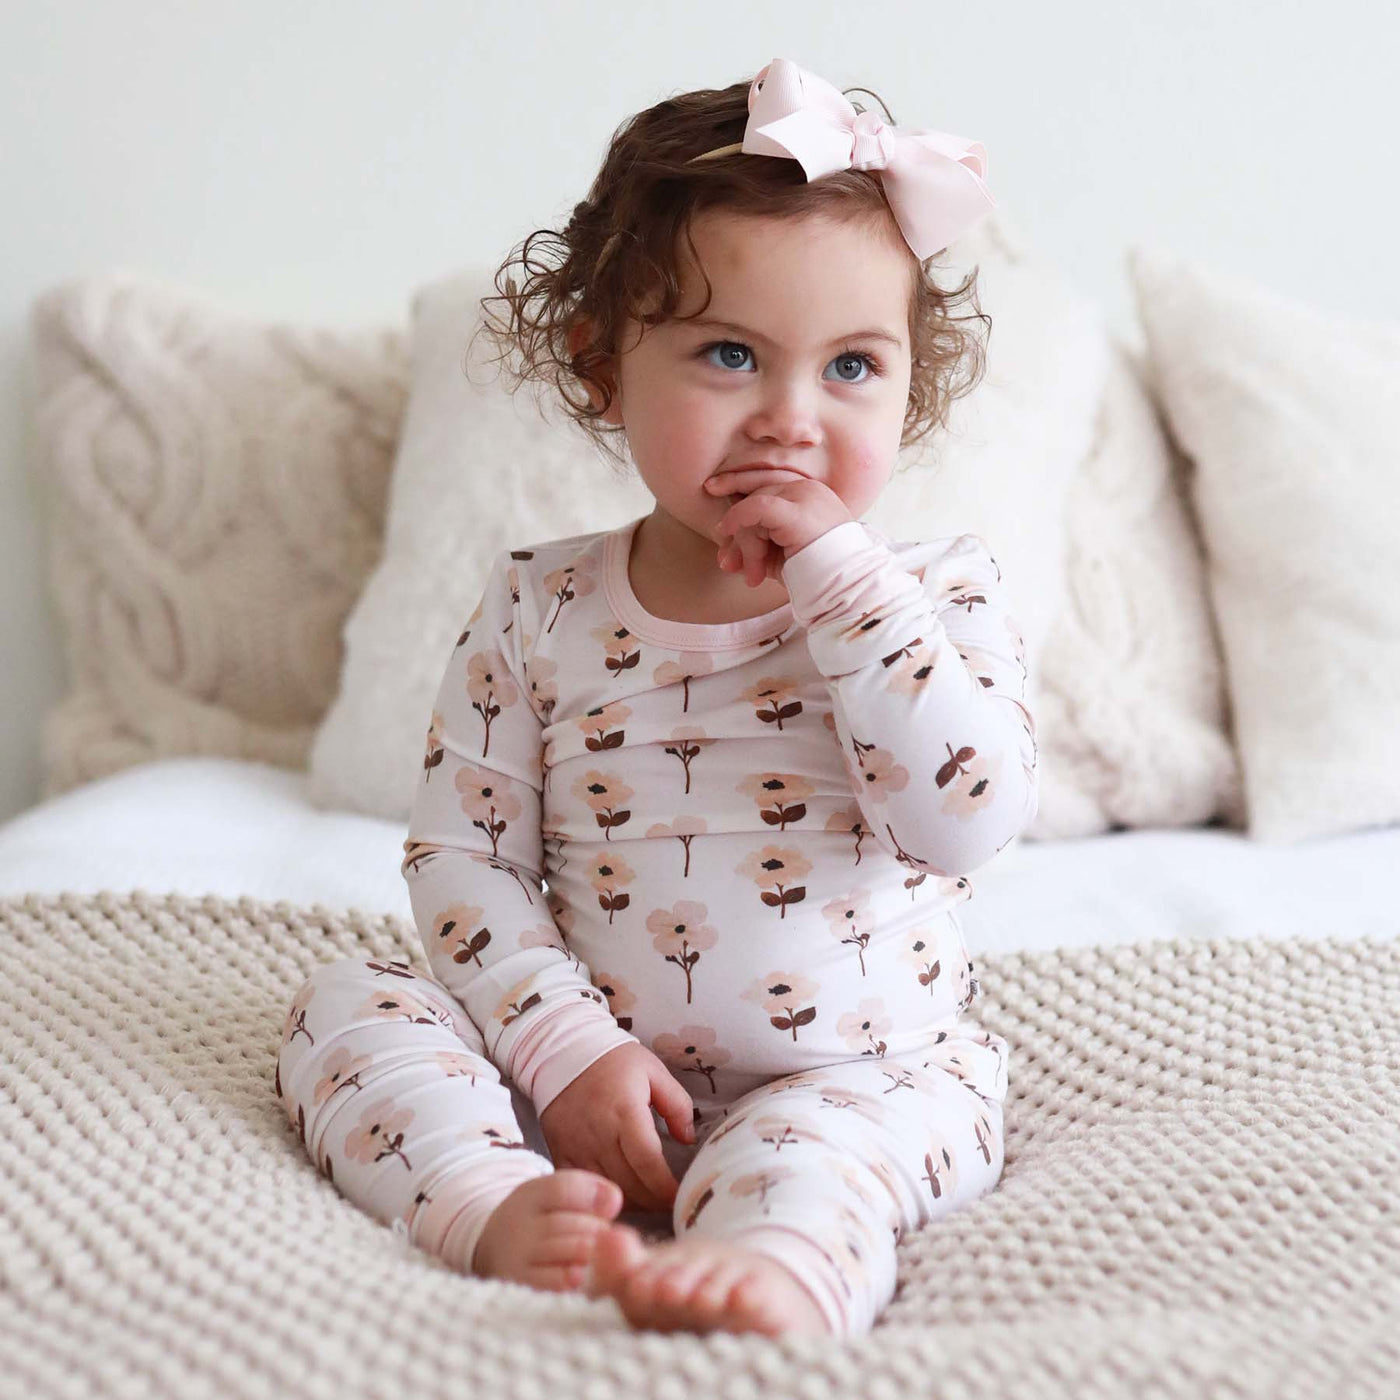 muted neutral floral for kids two piece pajama set 